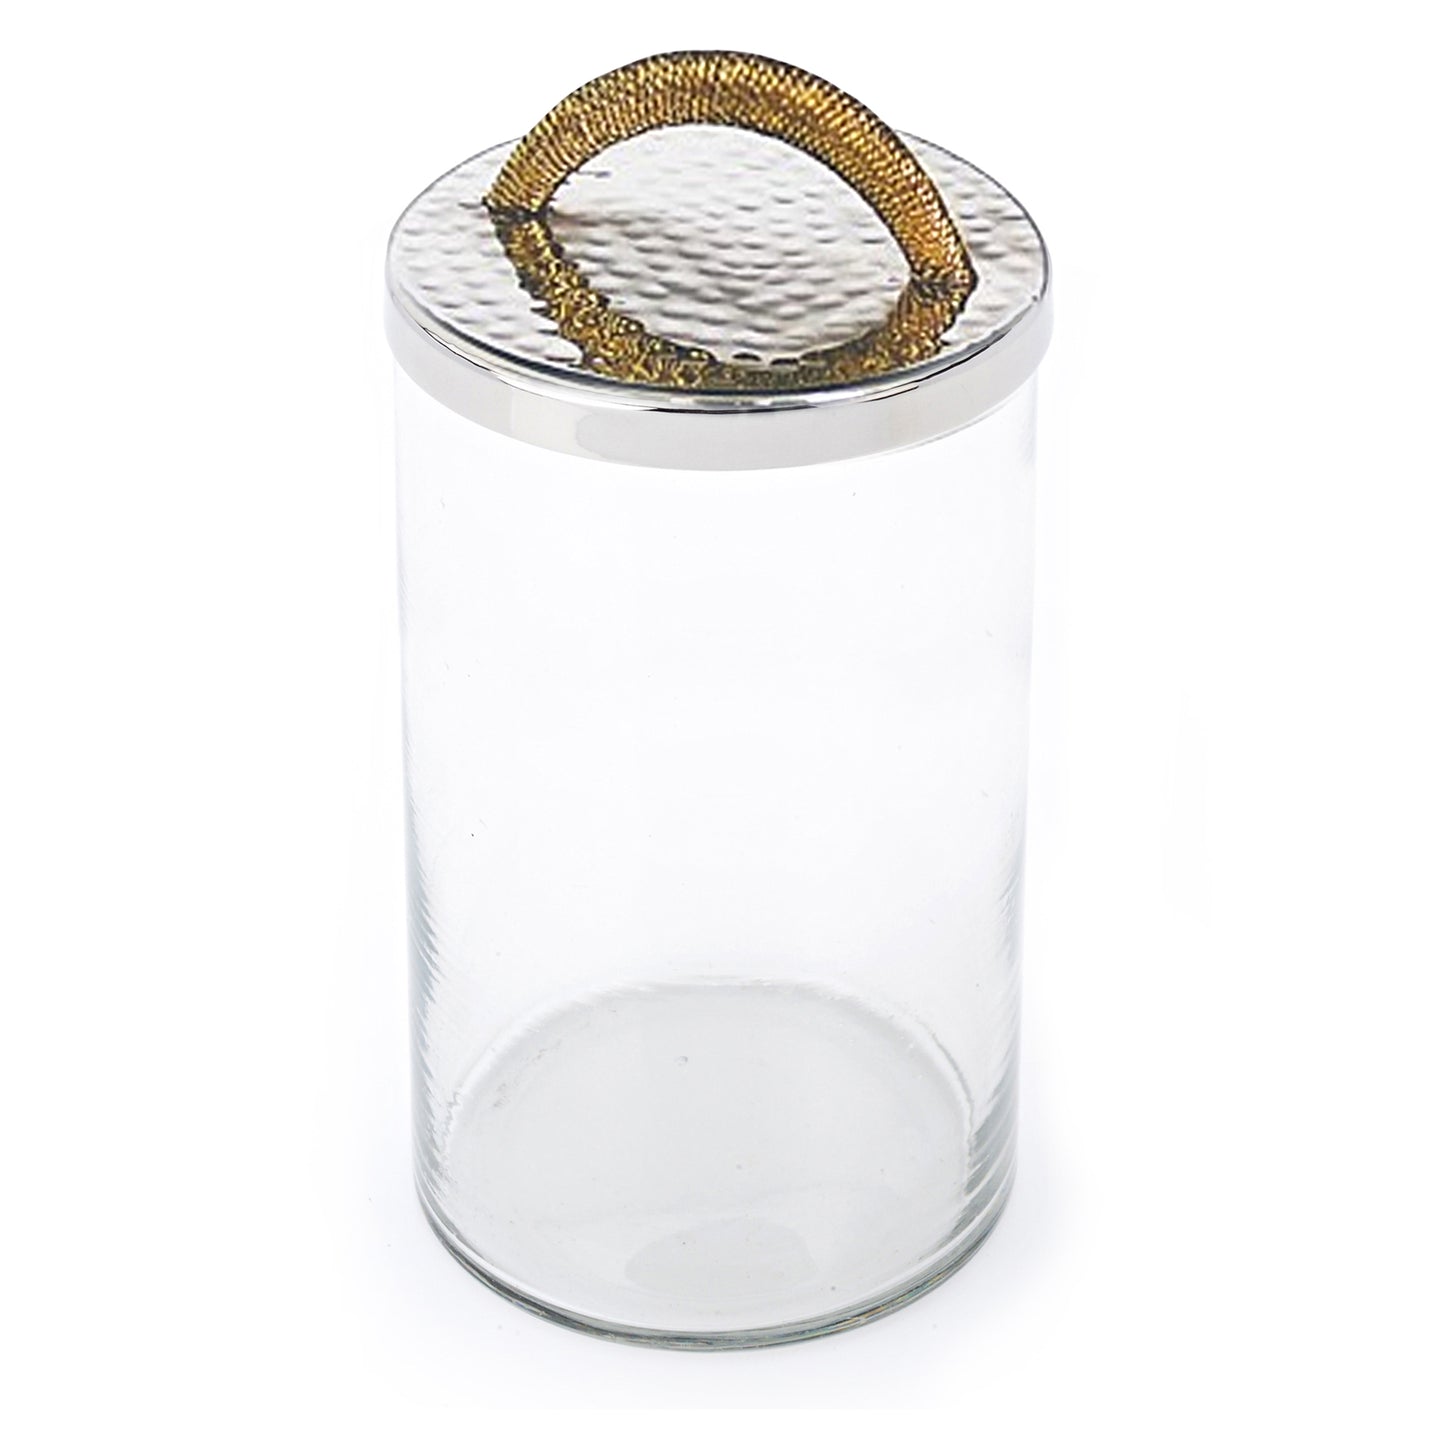 Glass Canister with Stainless Steel Lid and Gold Handle, Small